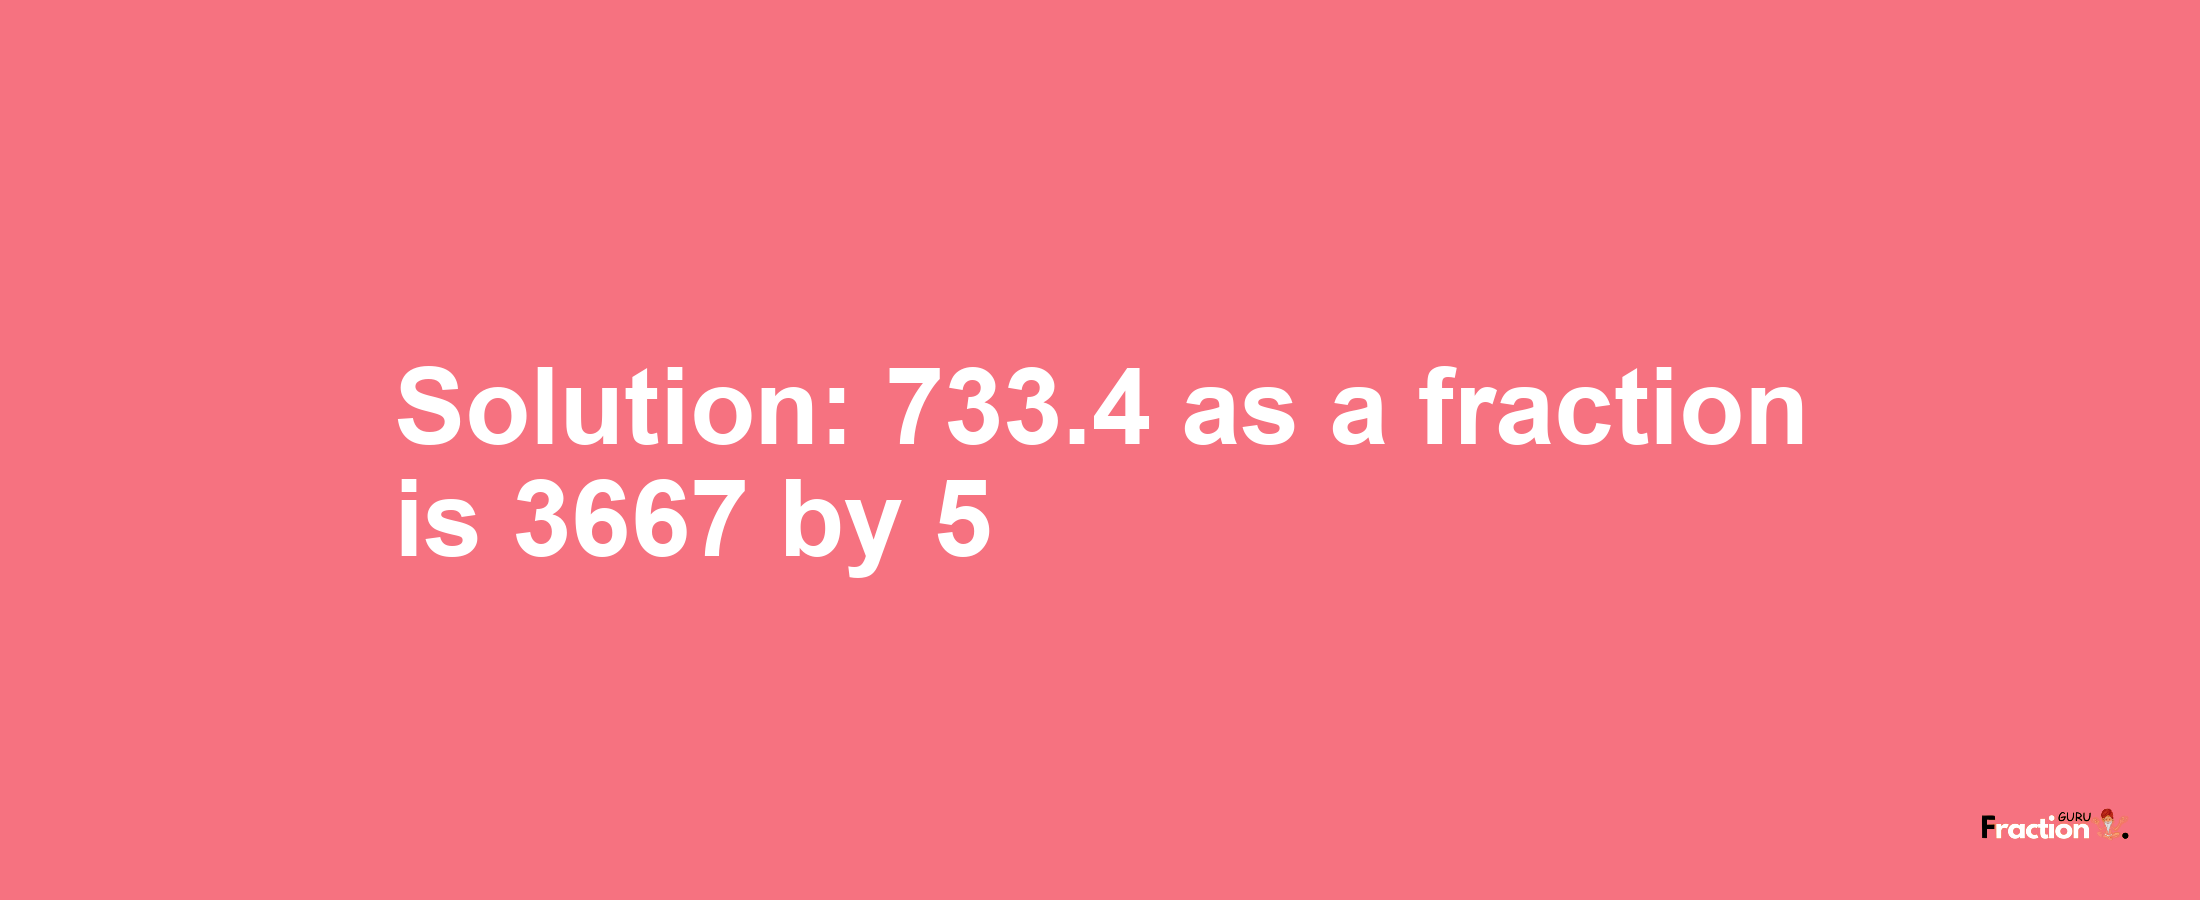 Solution:733.4 as a fraction is 3667/5